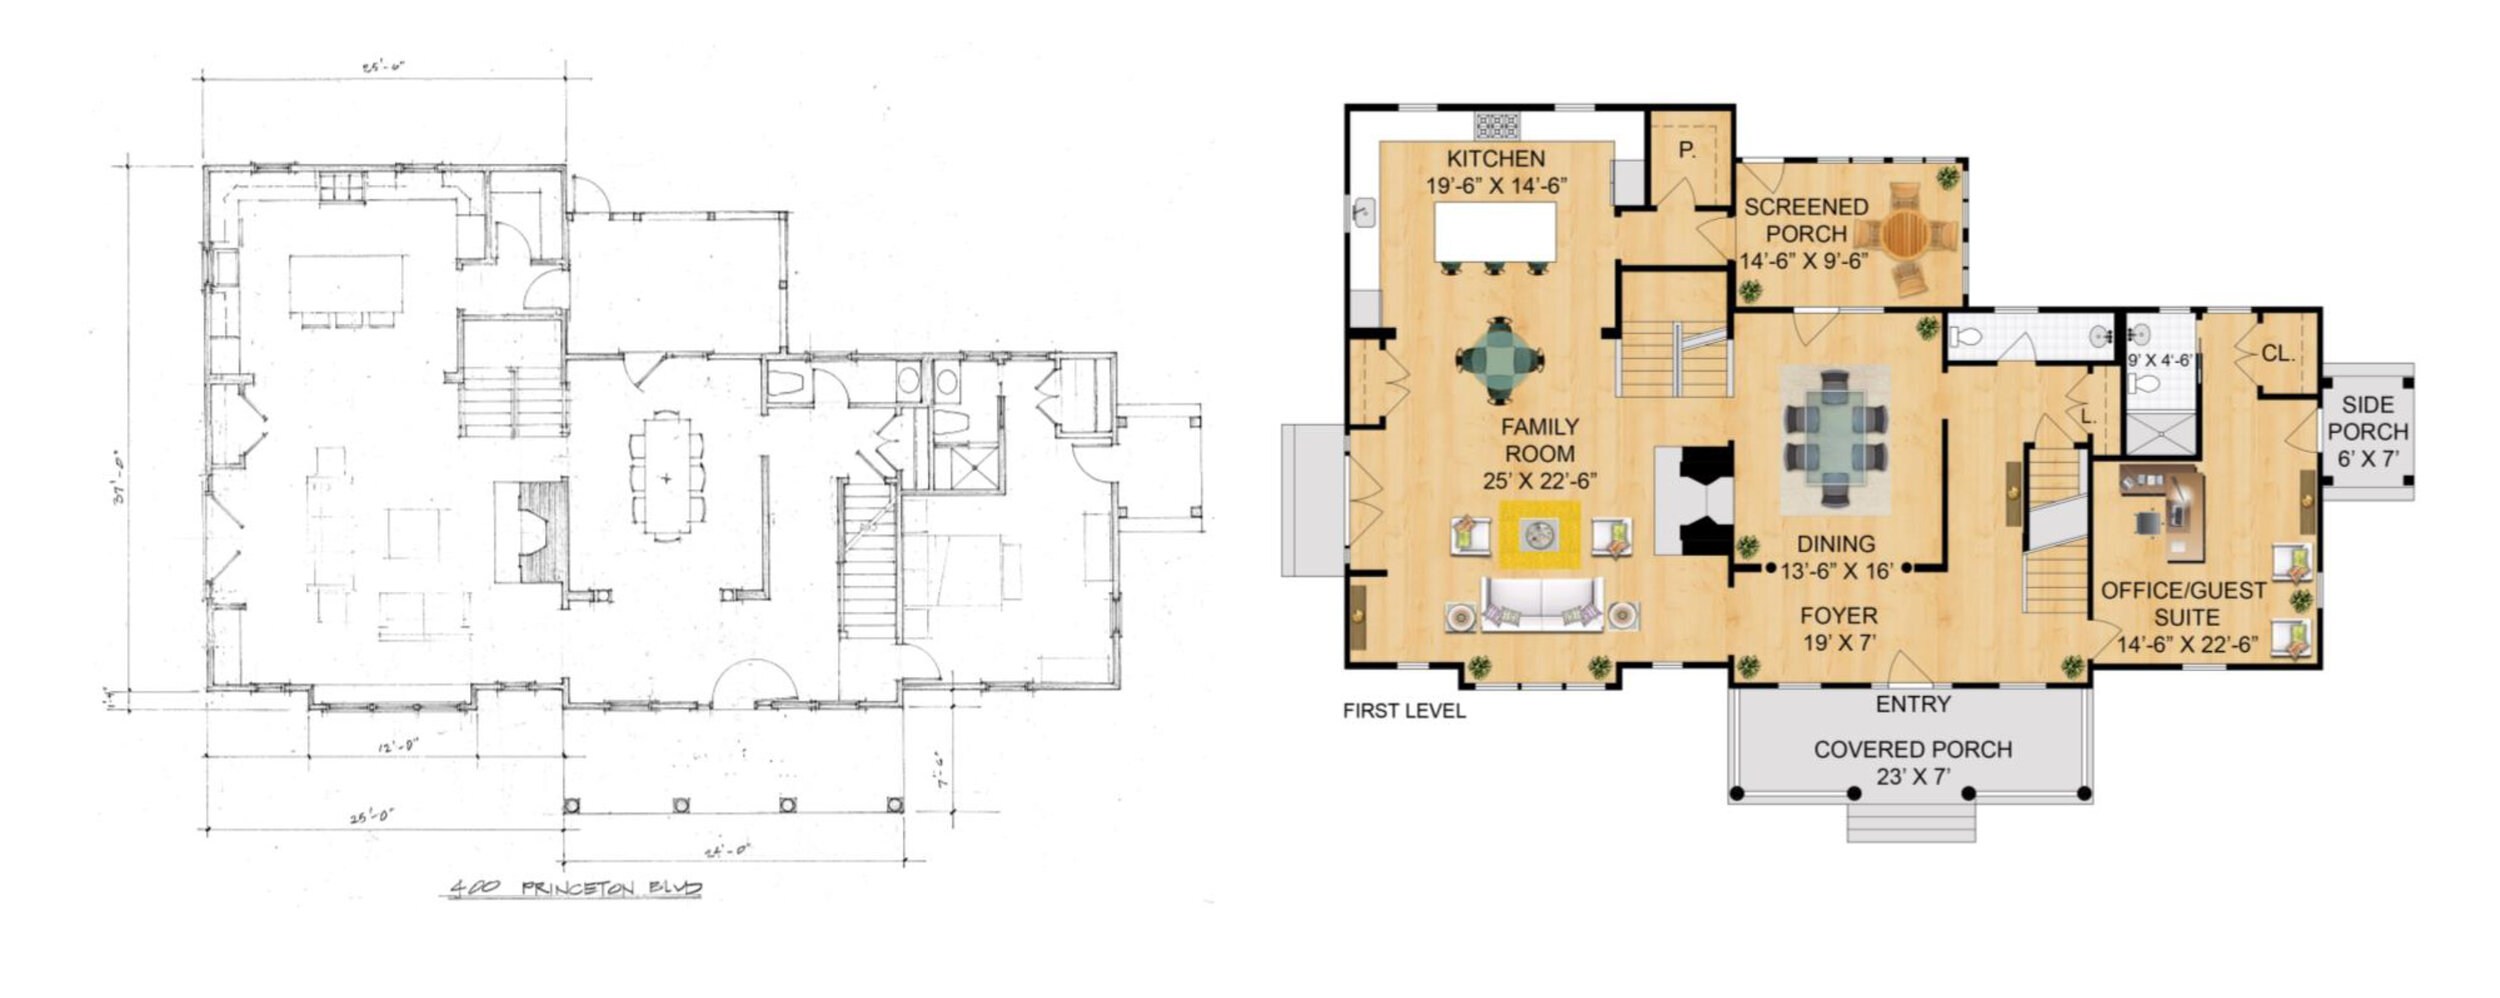 Sketchup Tutorial  How to create a quick floor plan